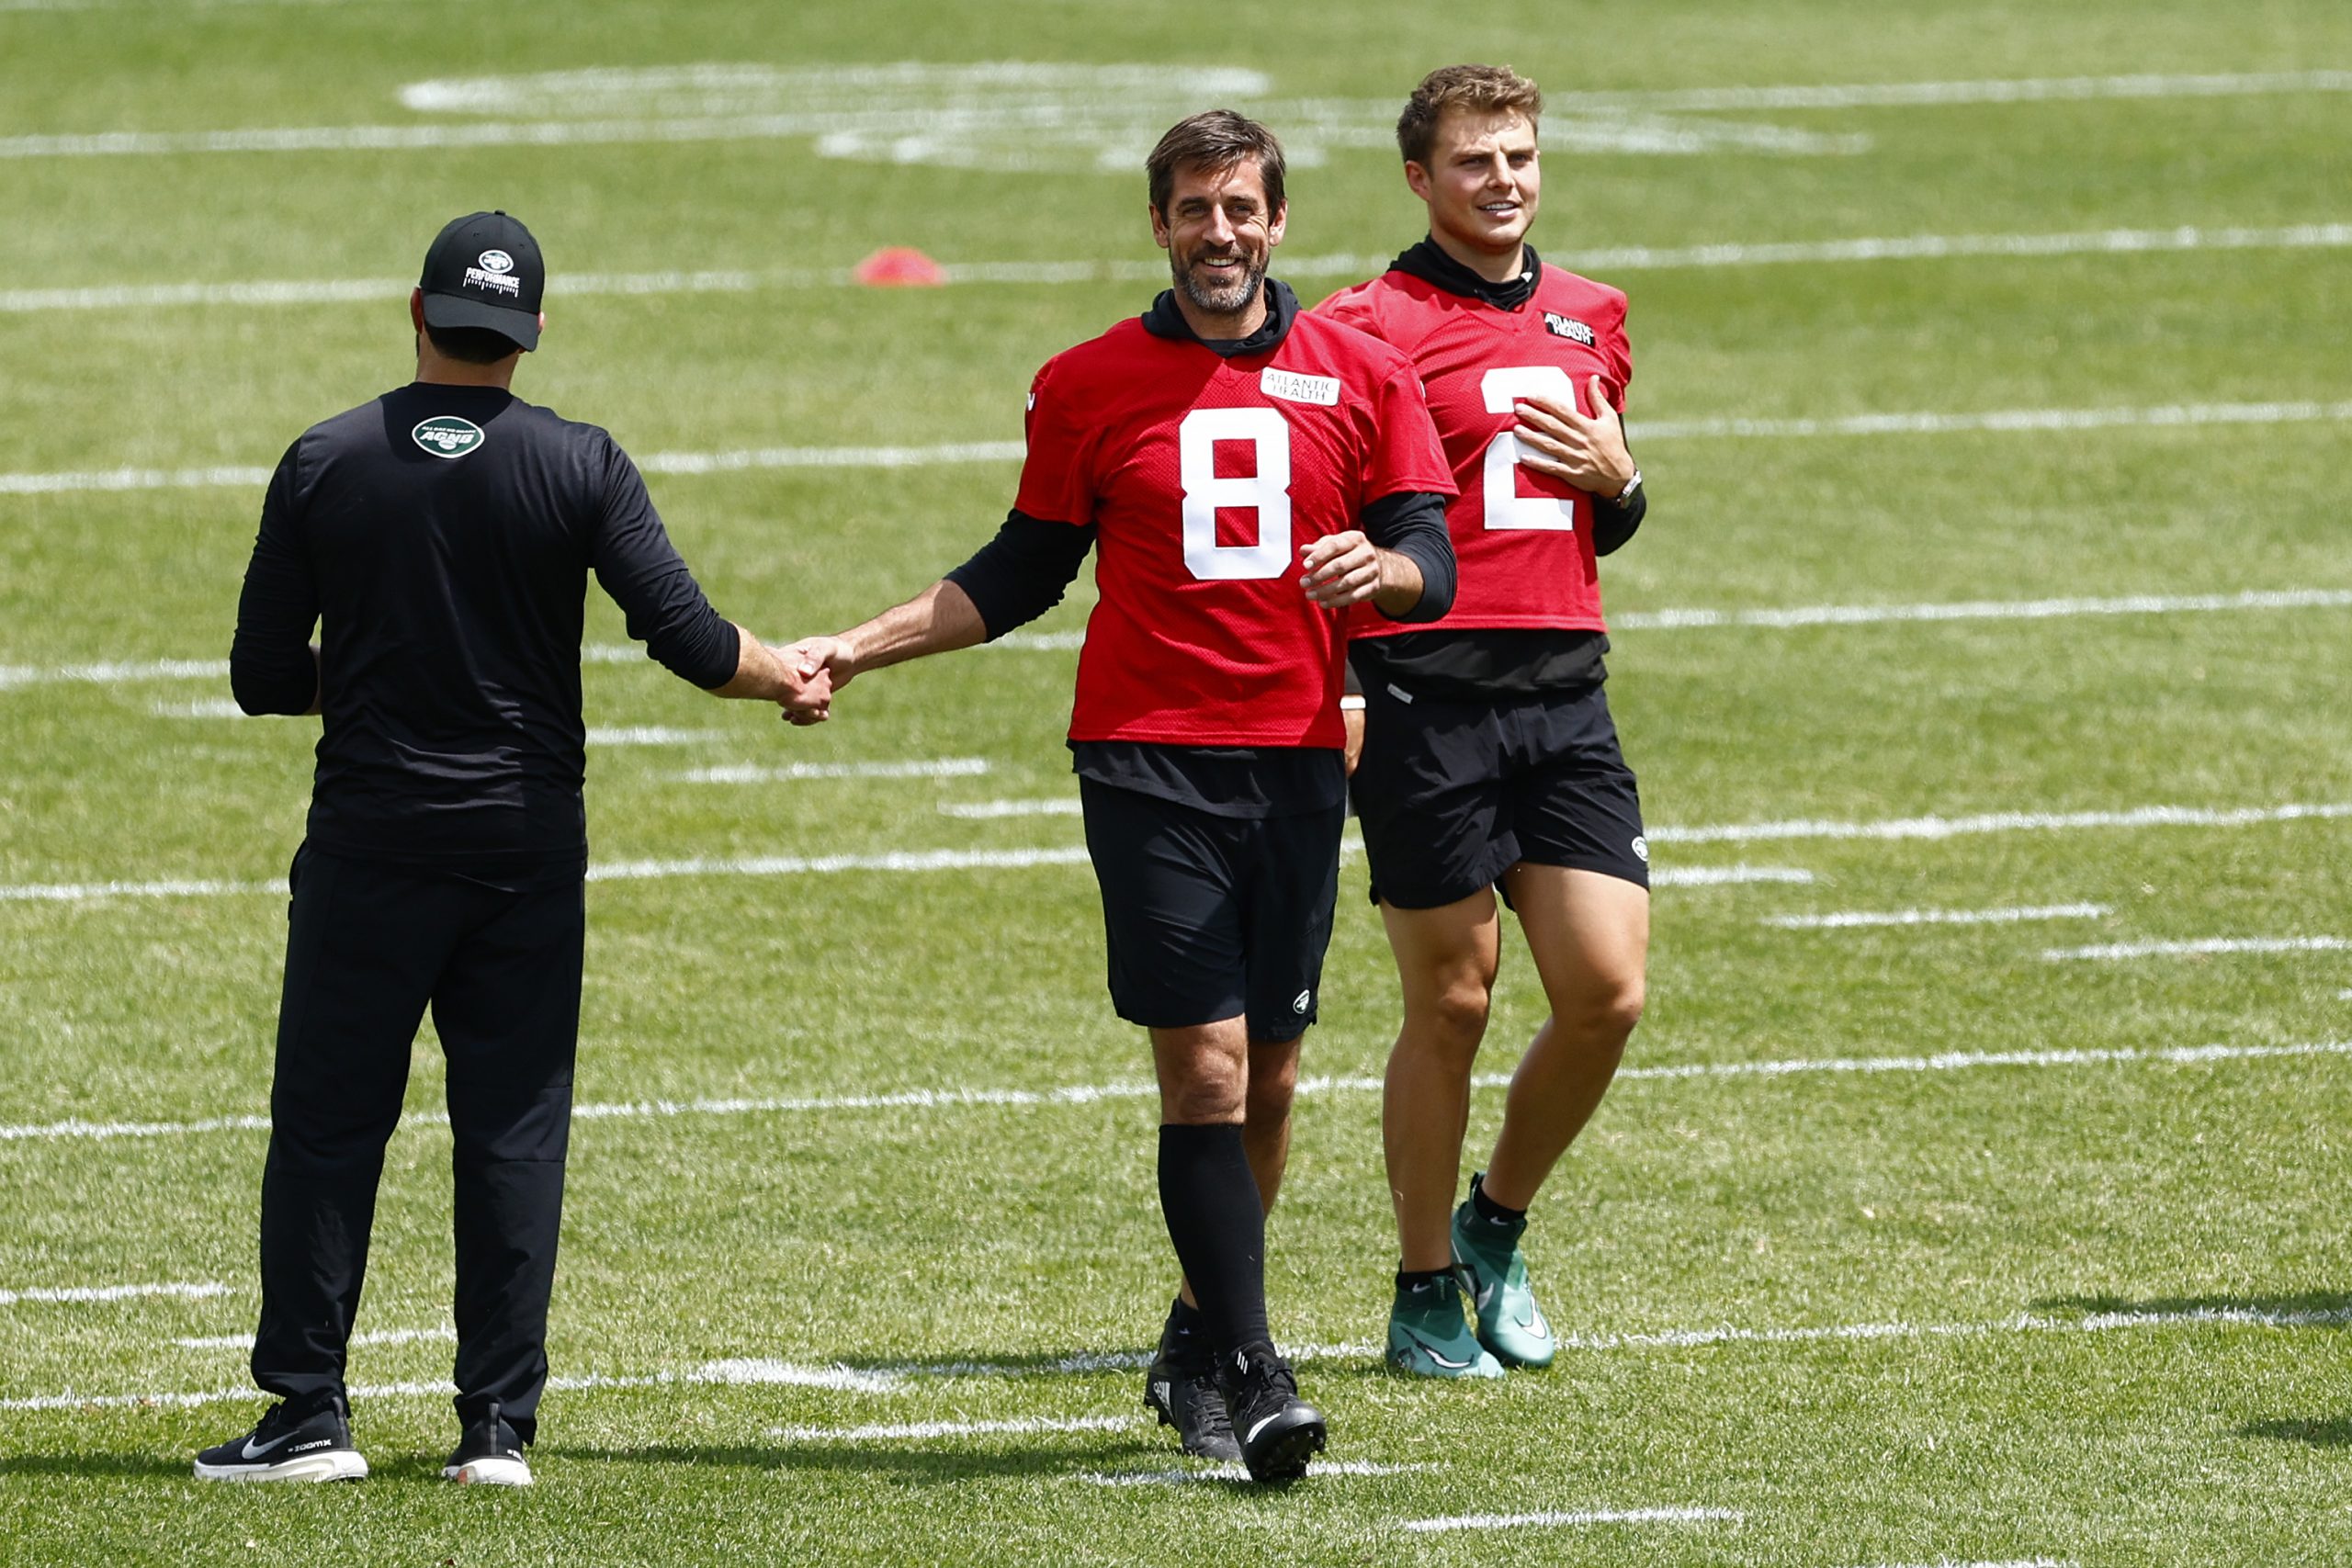 FLORHAM PARK, NEW JERSEY - JUNE 9: Quarterbacks Aaron Rodgers #8 and Zach Wilson #2 of the New York...